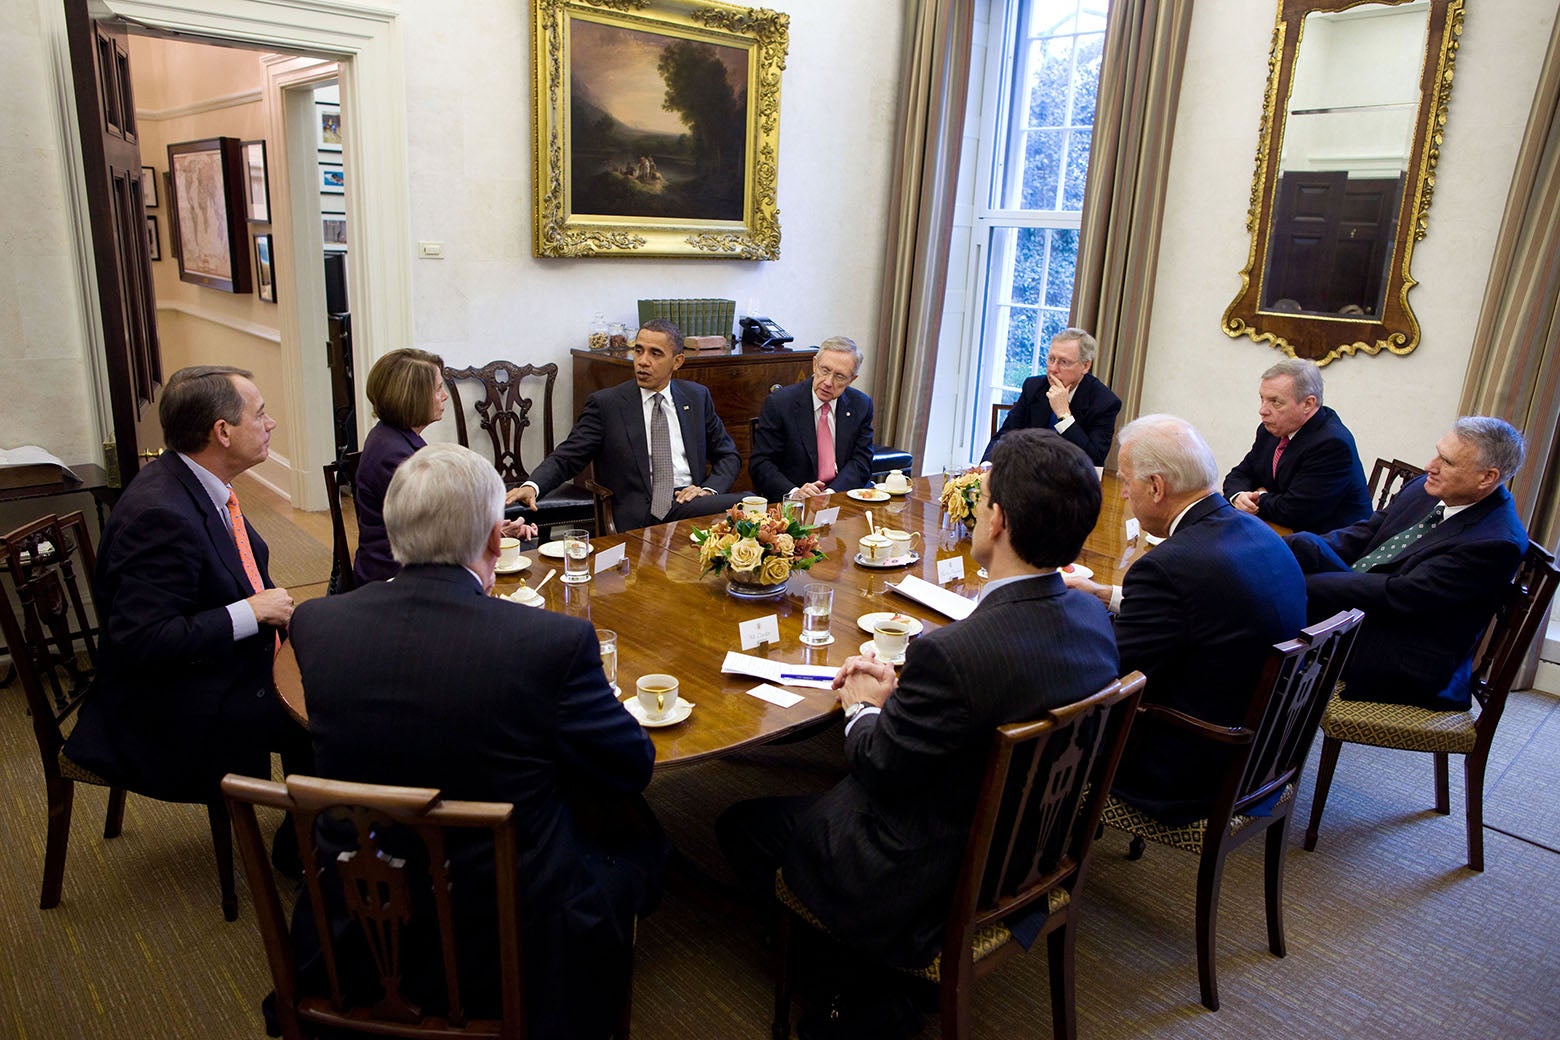 Obama meets with officials in the Presidential Dining Room.